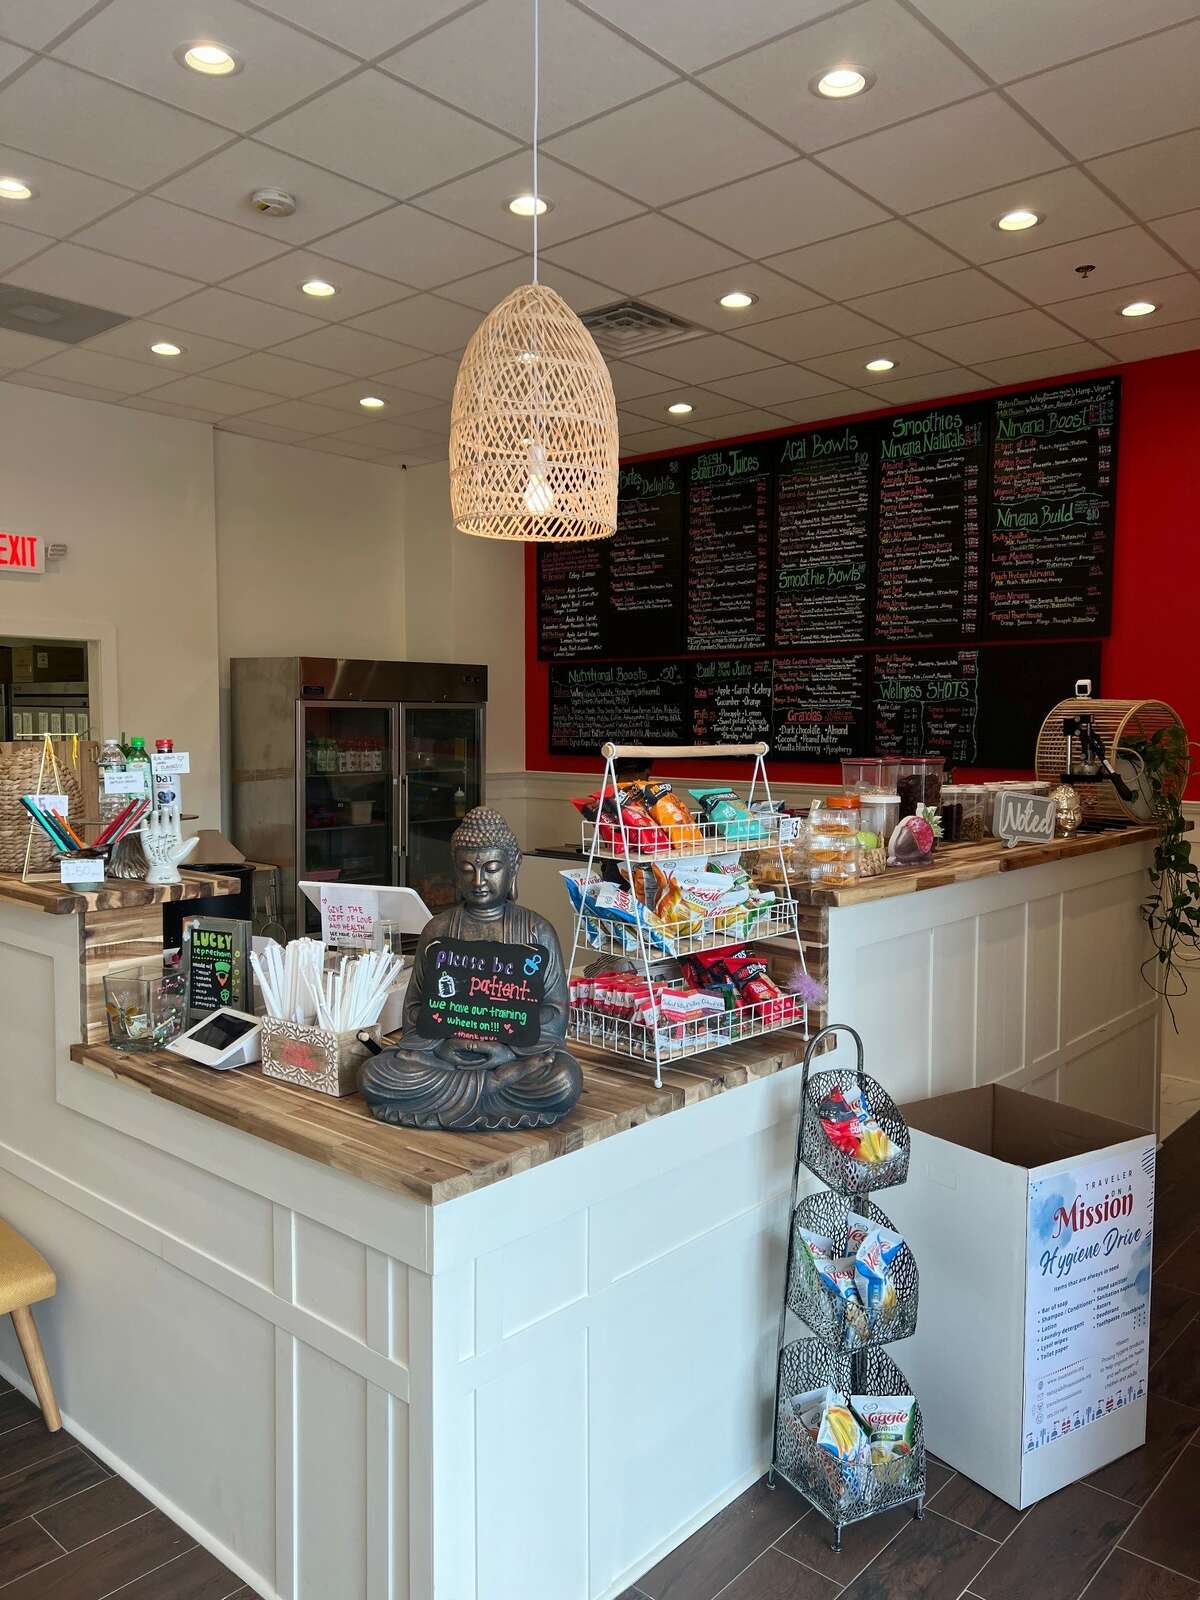 Liquid Nirvana, a juice and smoothie bar, is celebrating the grand opening of its Farmington store. 